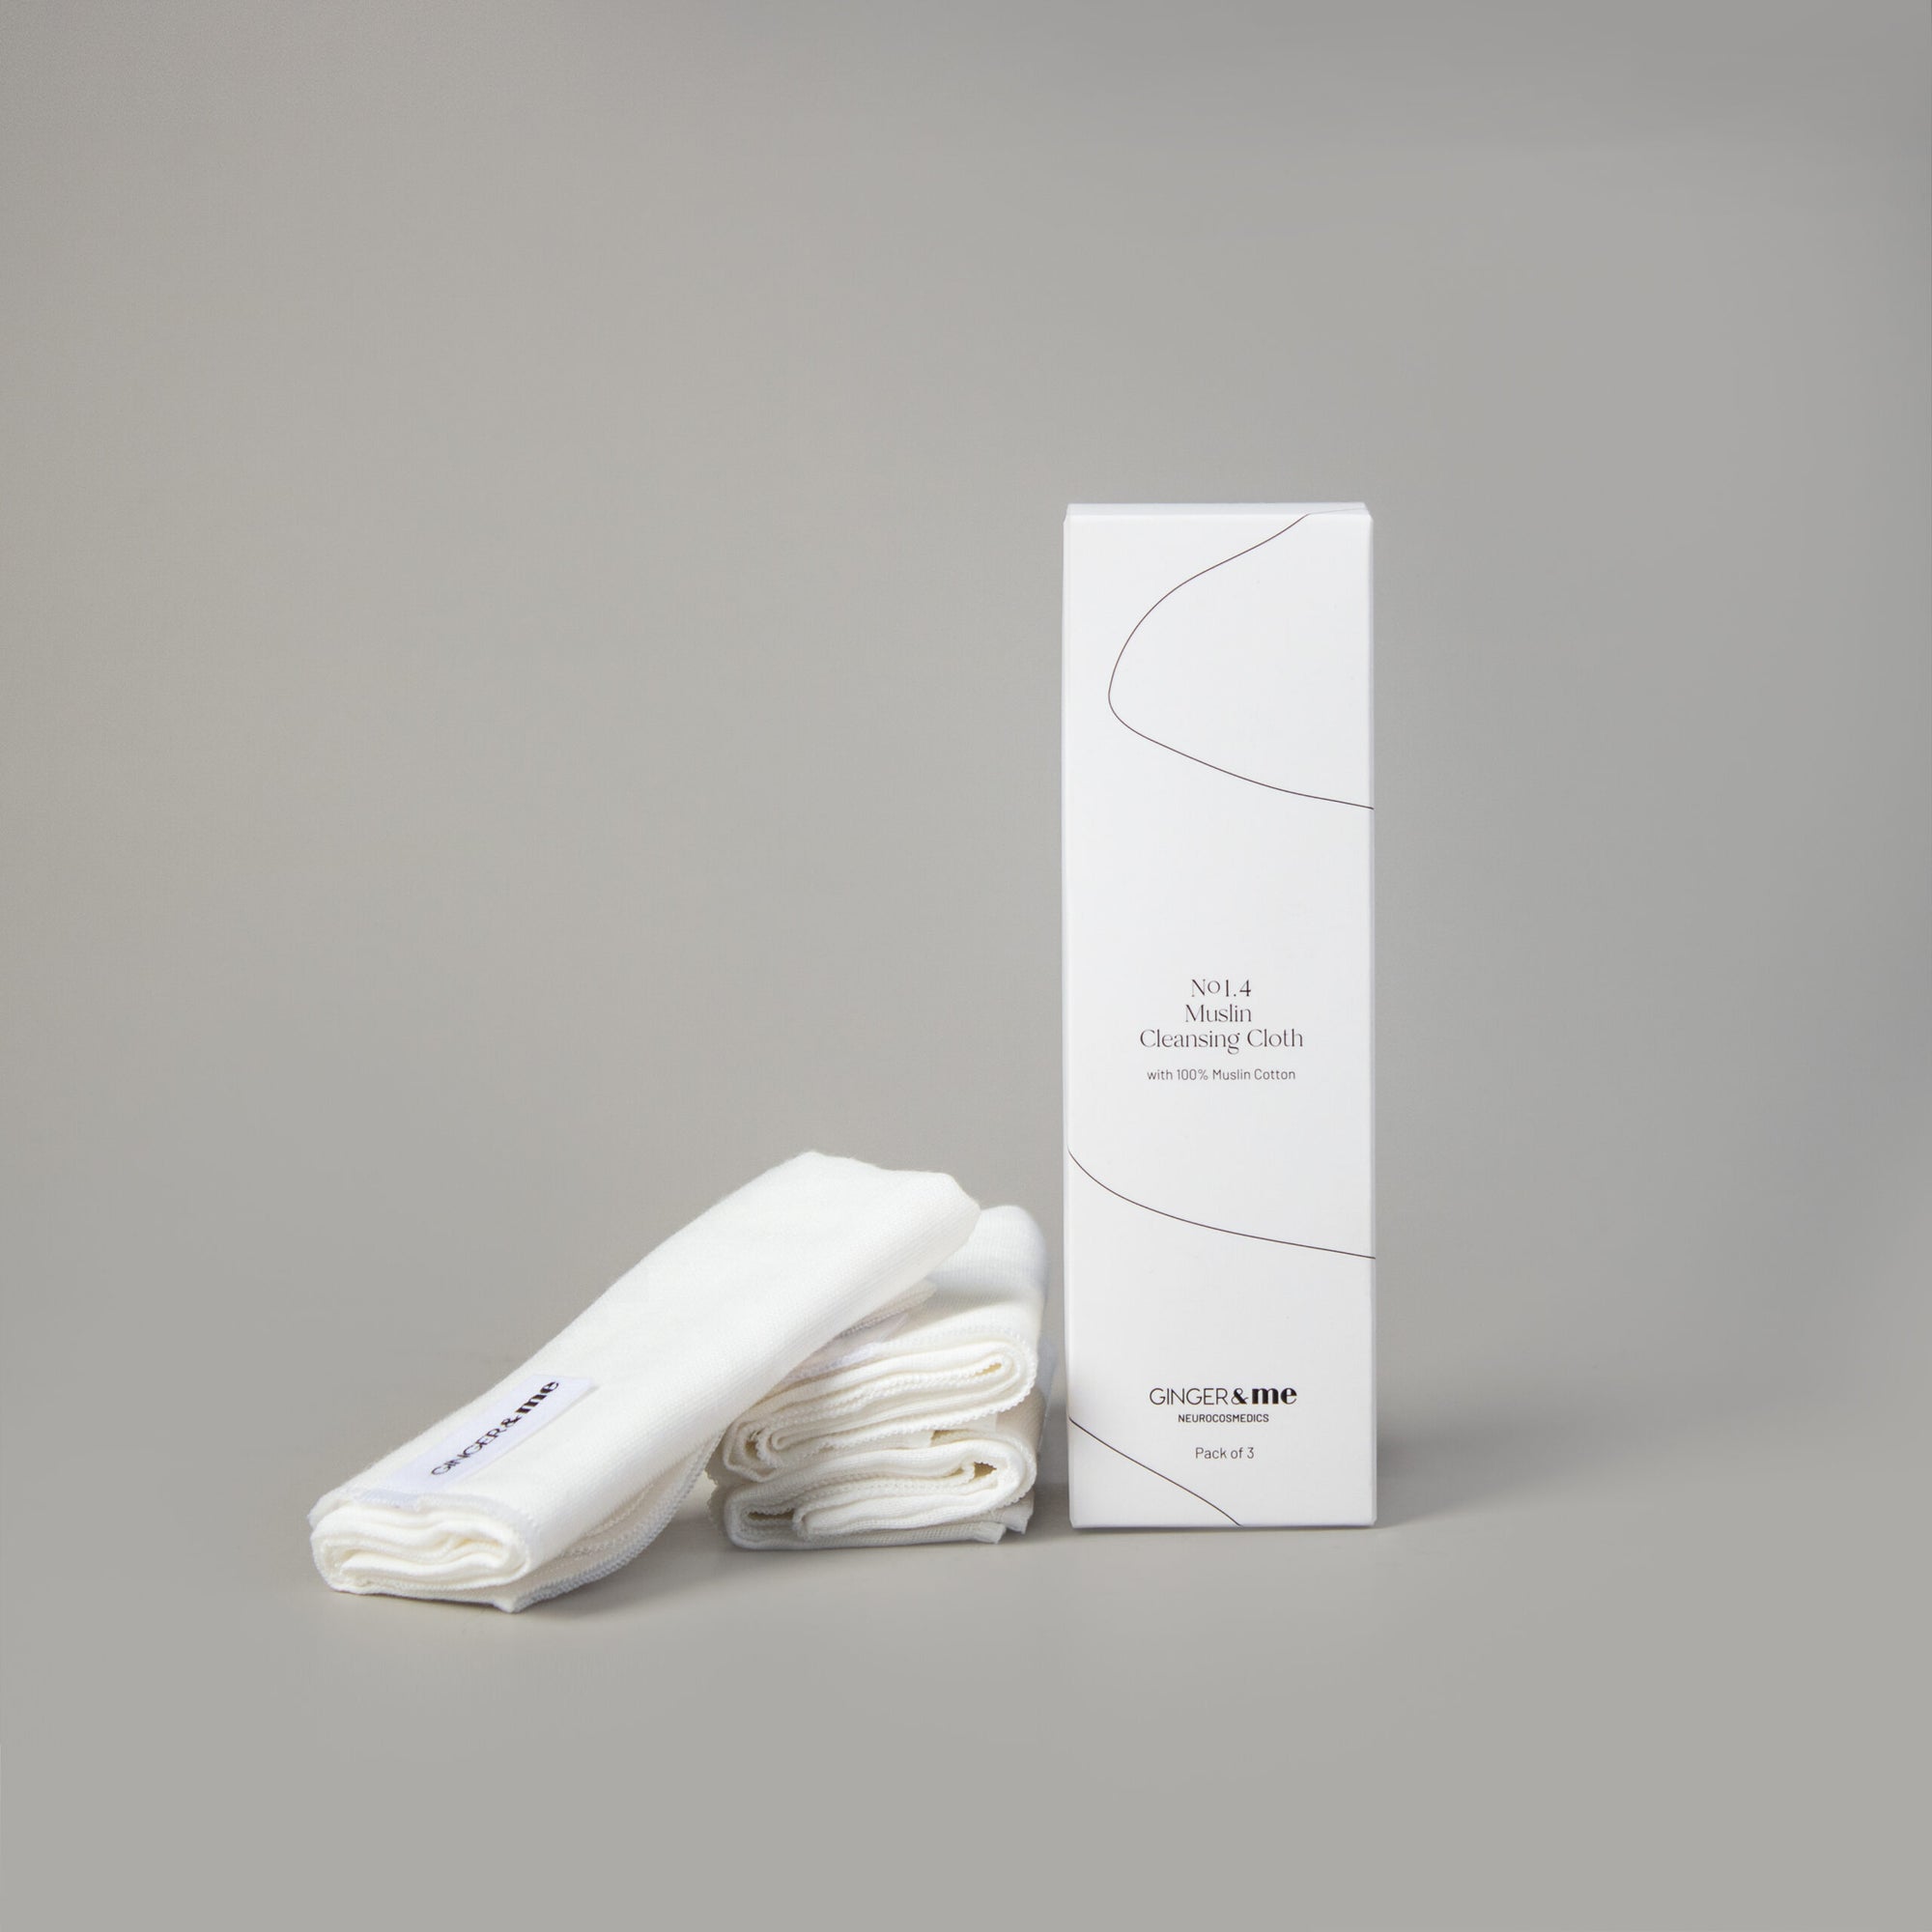 Ginger & Me - Muslin Cleansing Cloth